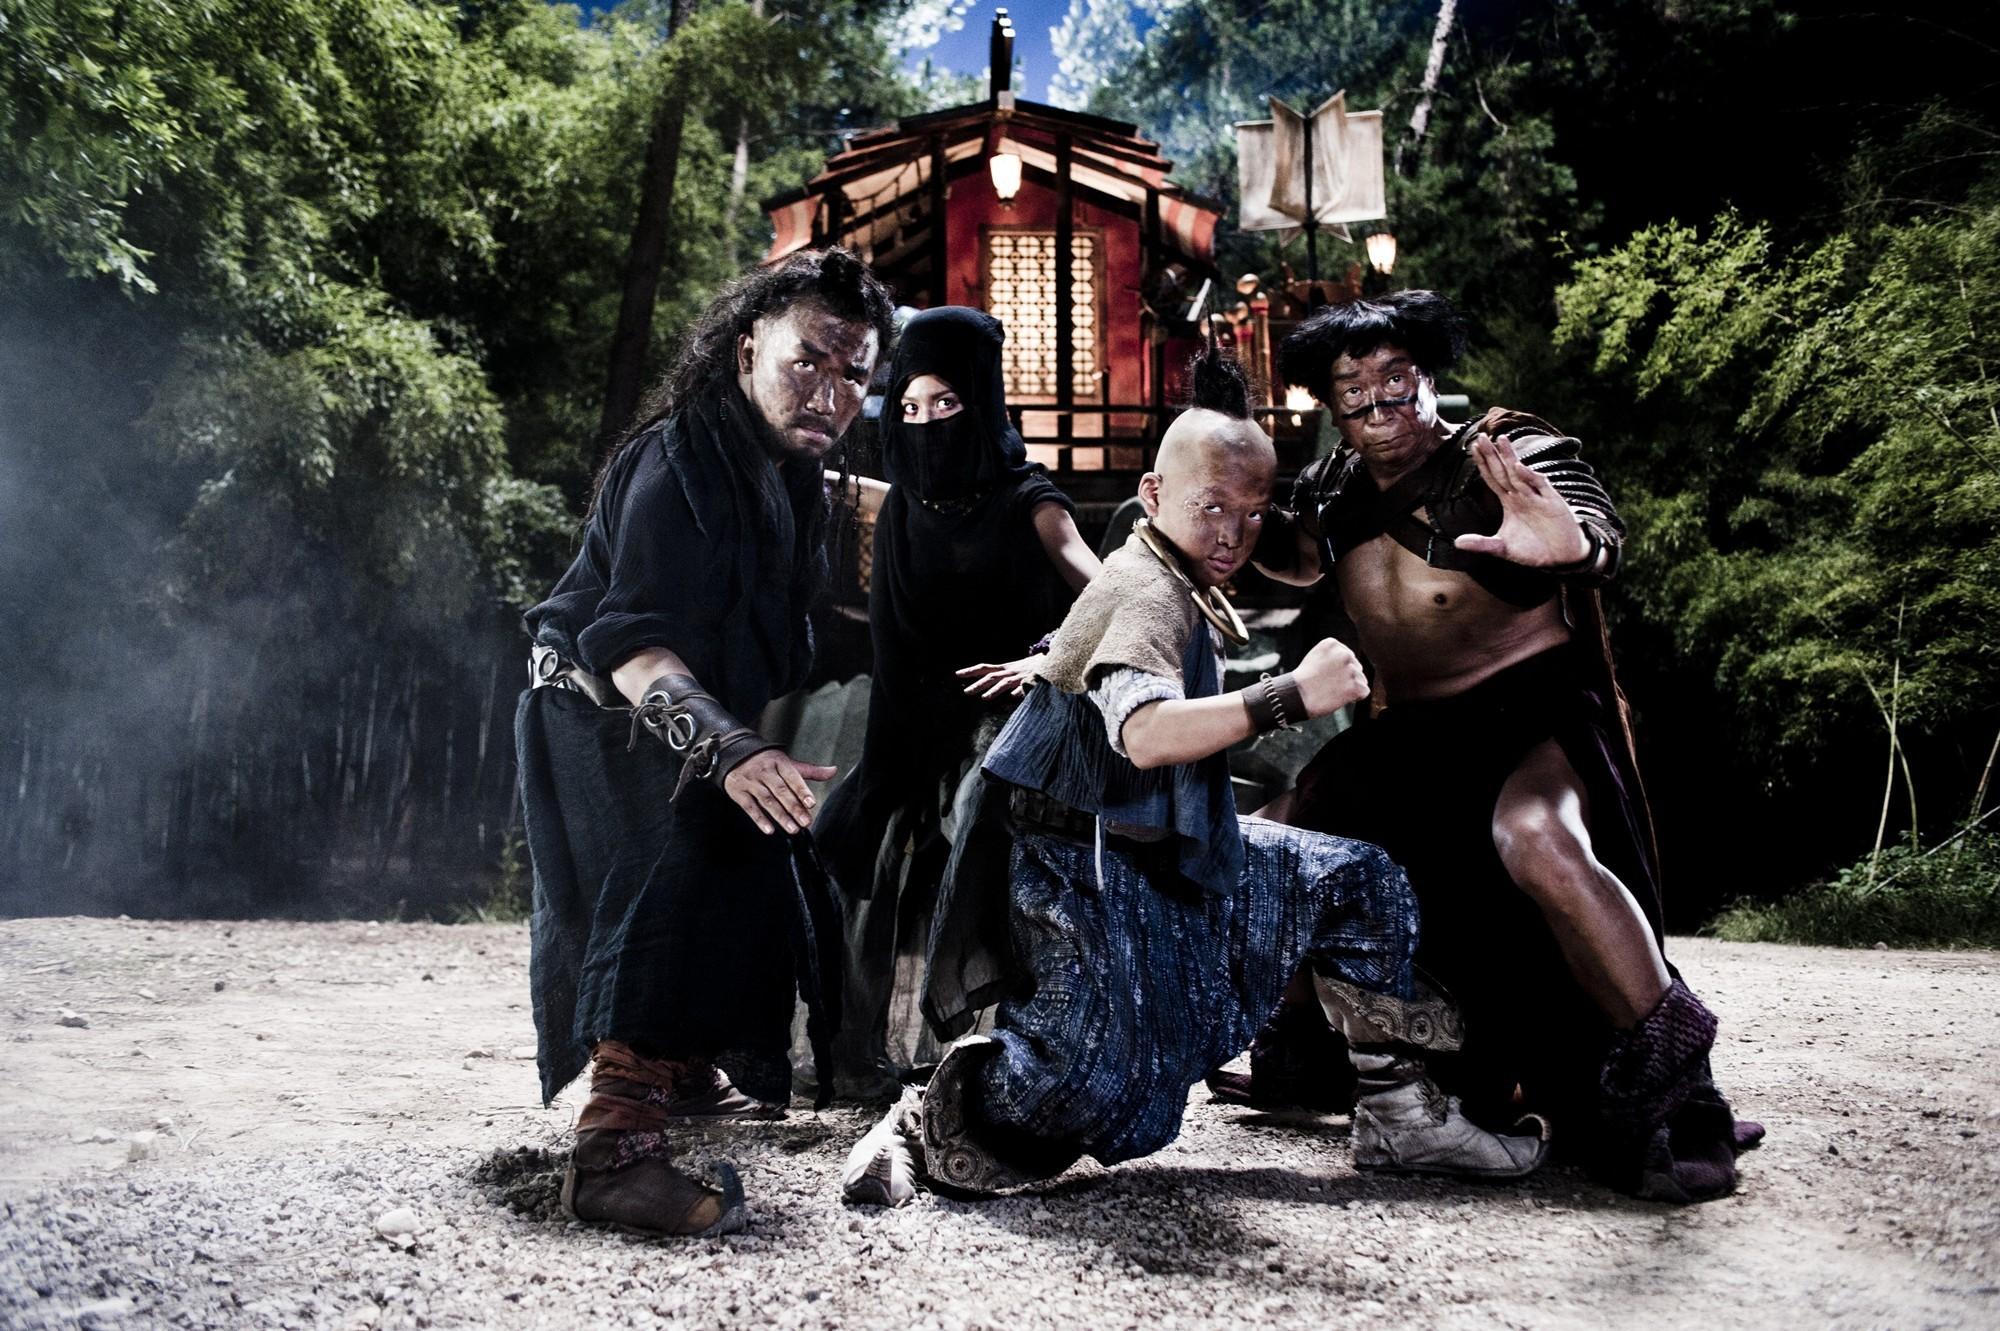 A scene from Magnet Releasing's Journey to the West (2014)